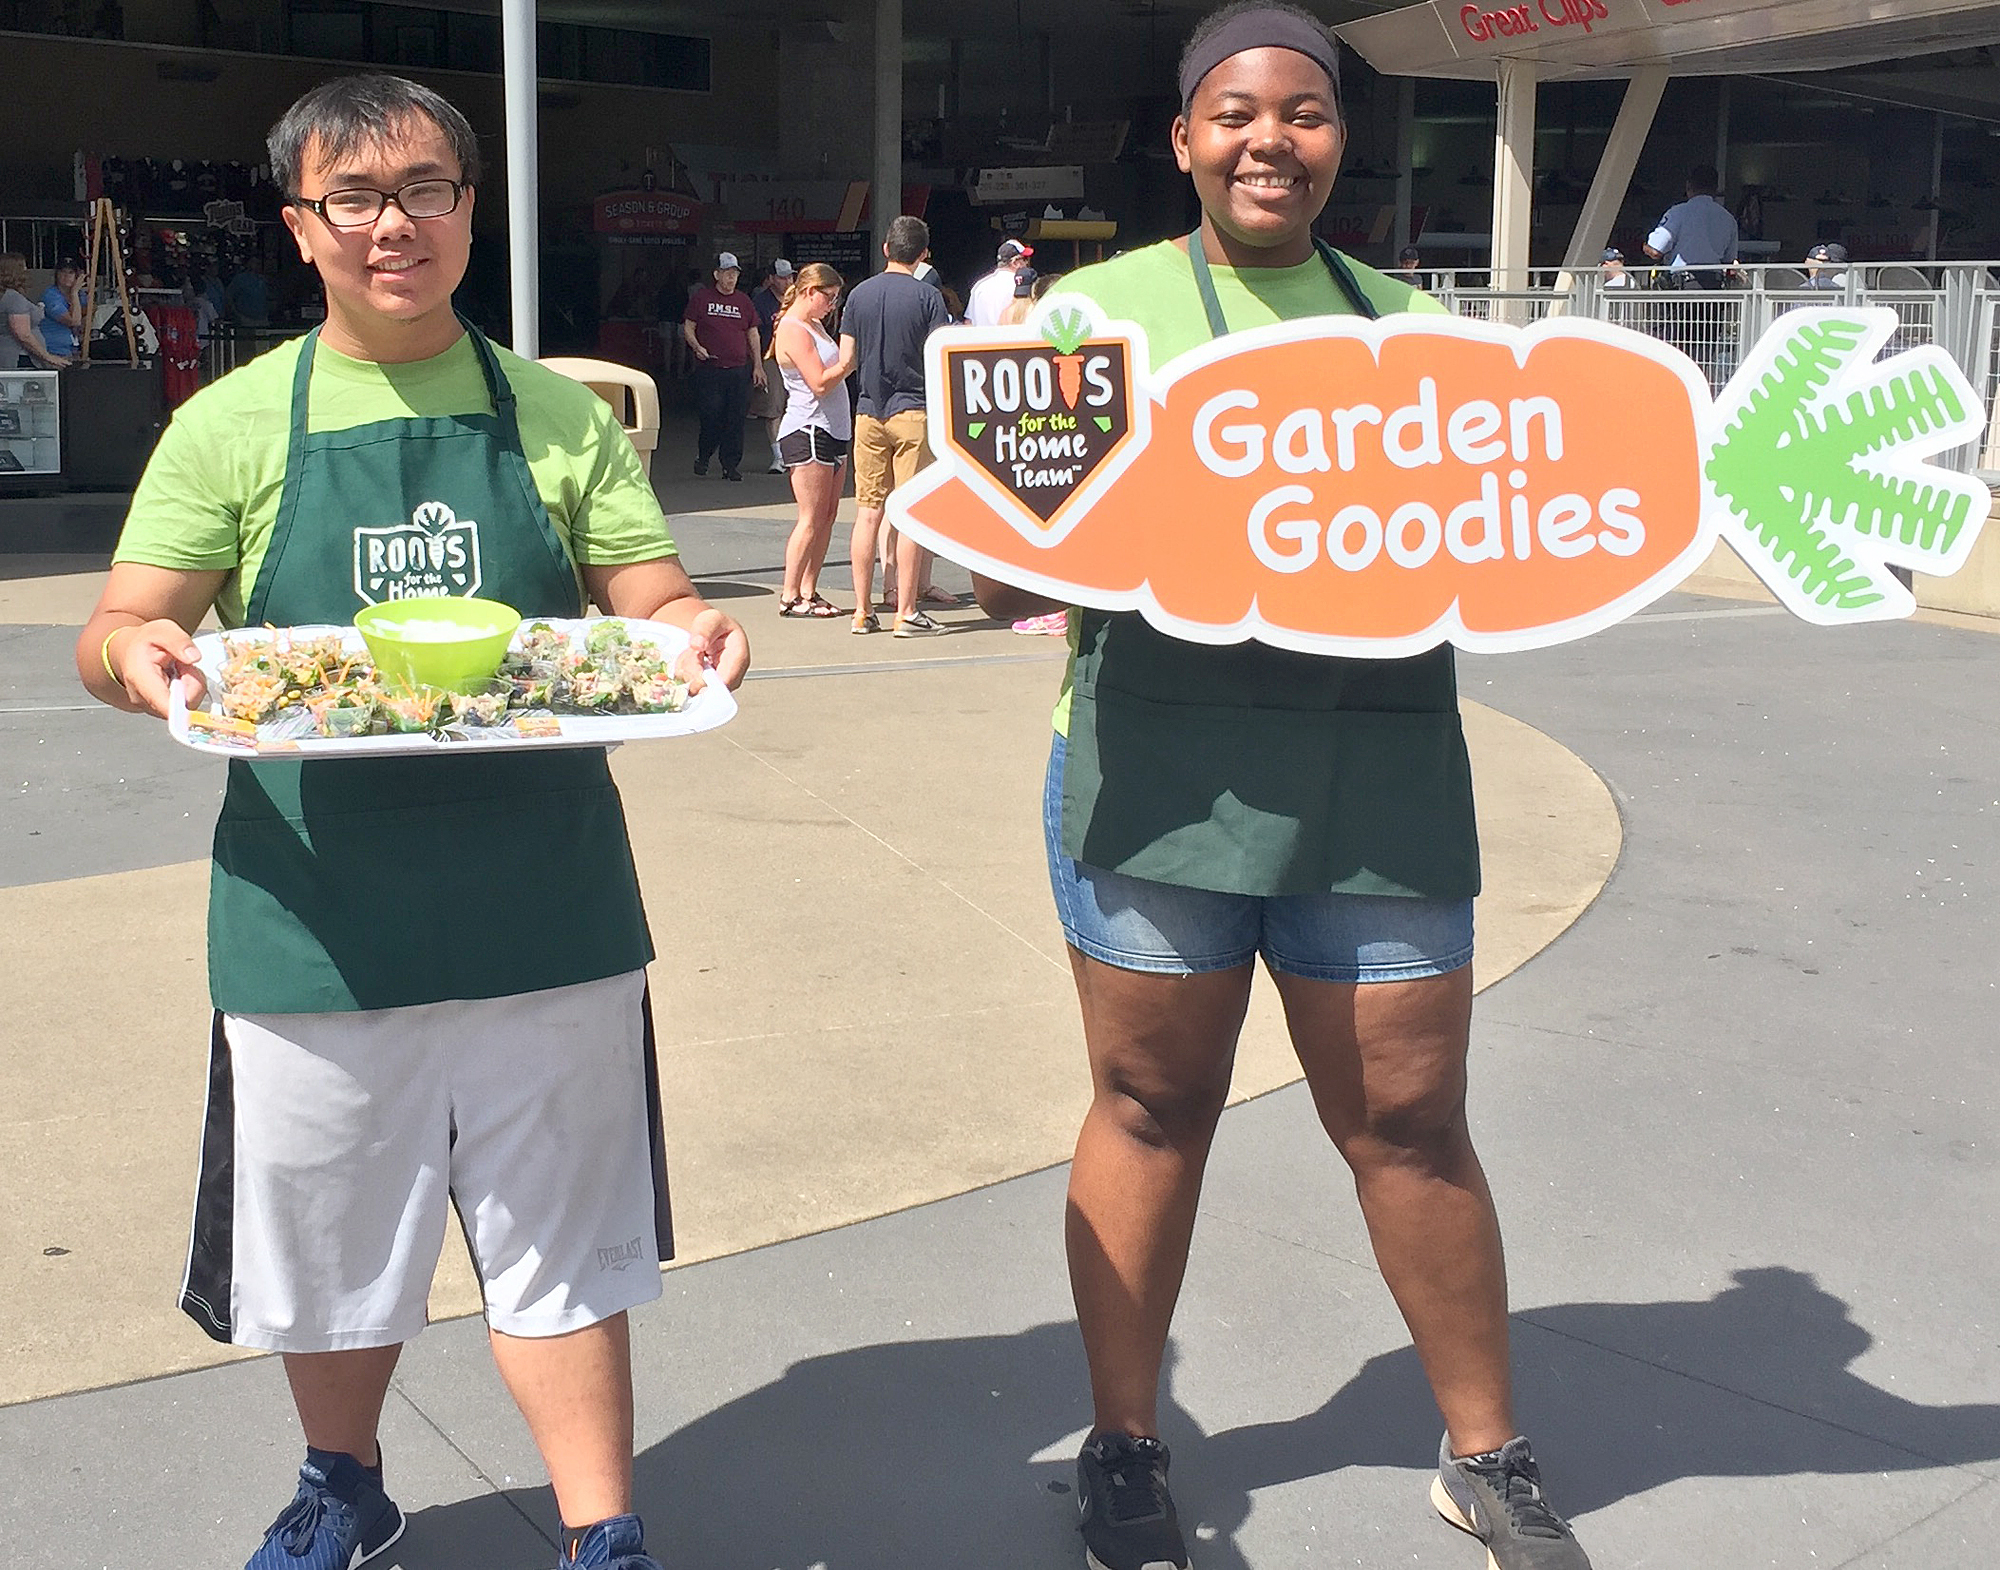 Two members of Roots for the Home Team, one holds up a sign that says, "Roots for the Home Team, Garden Goodies."